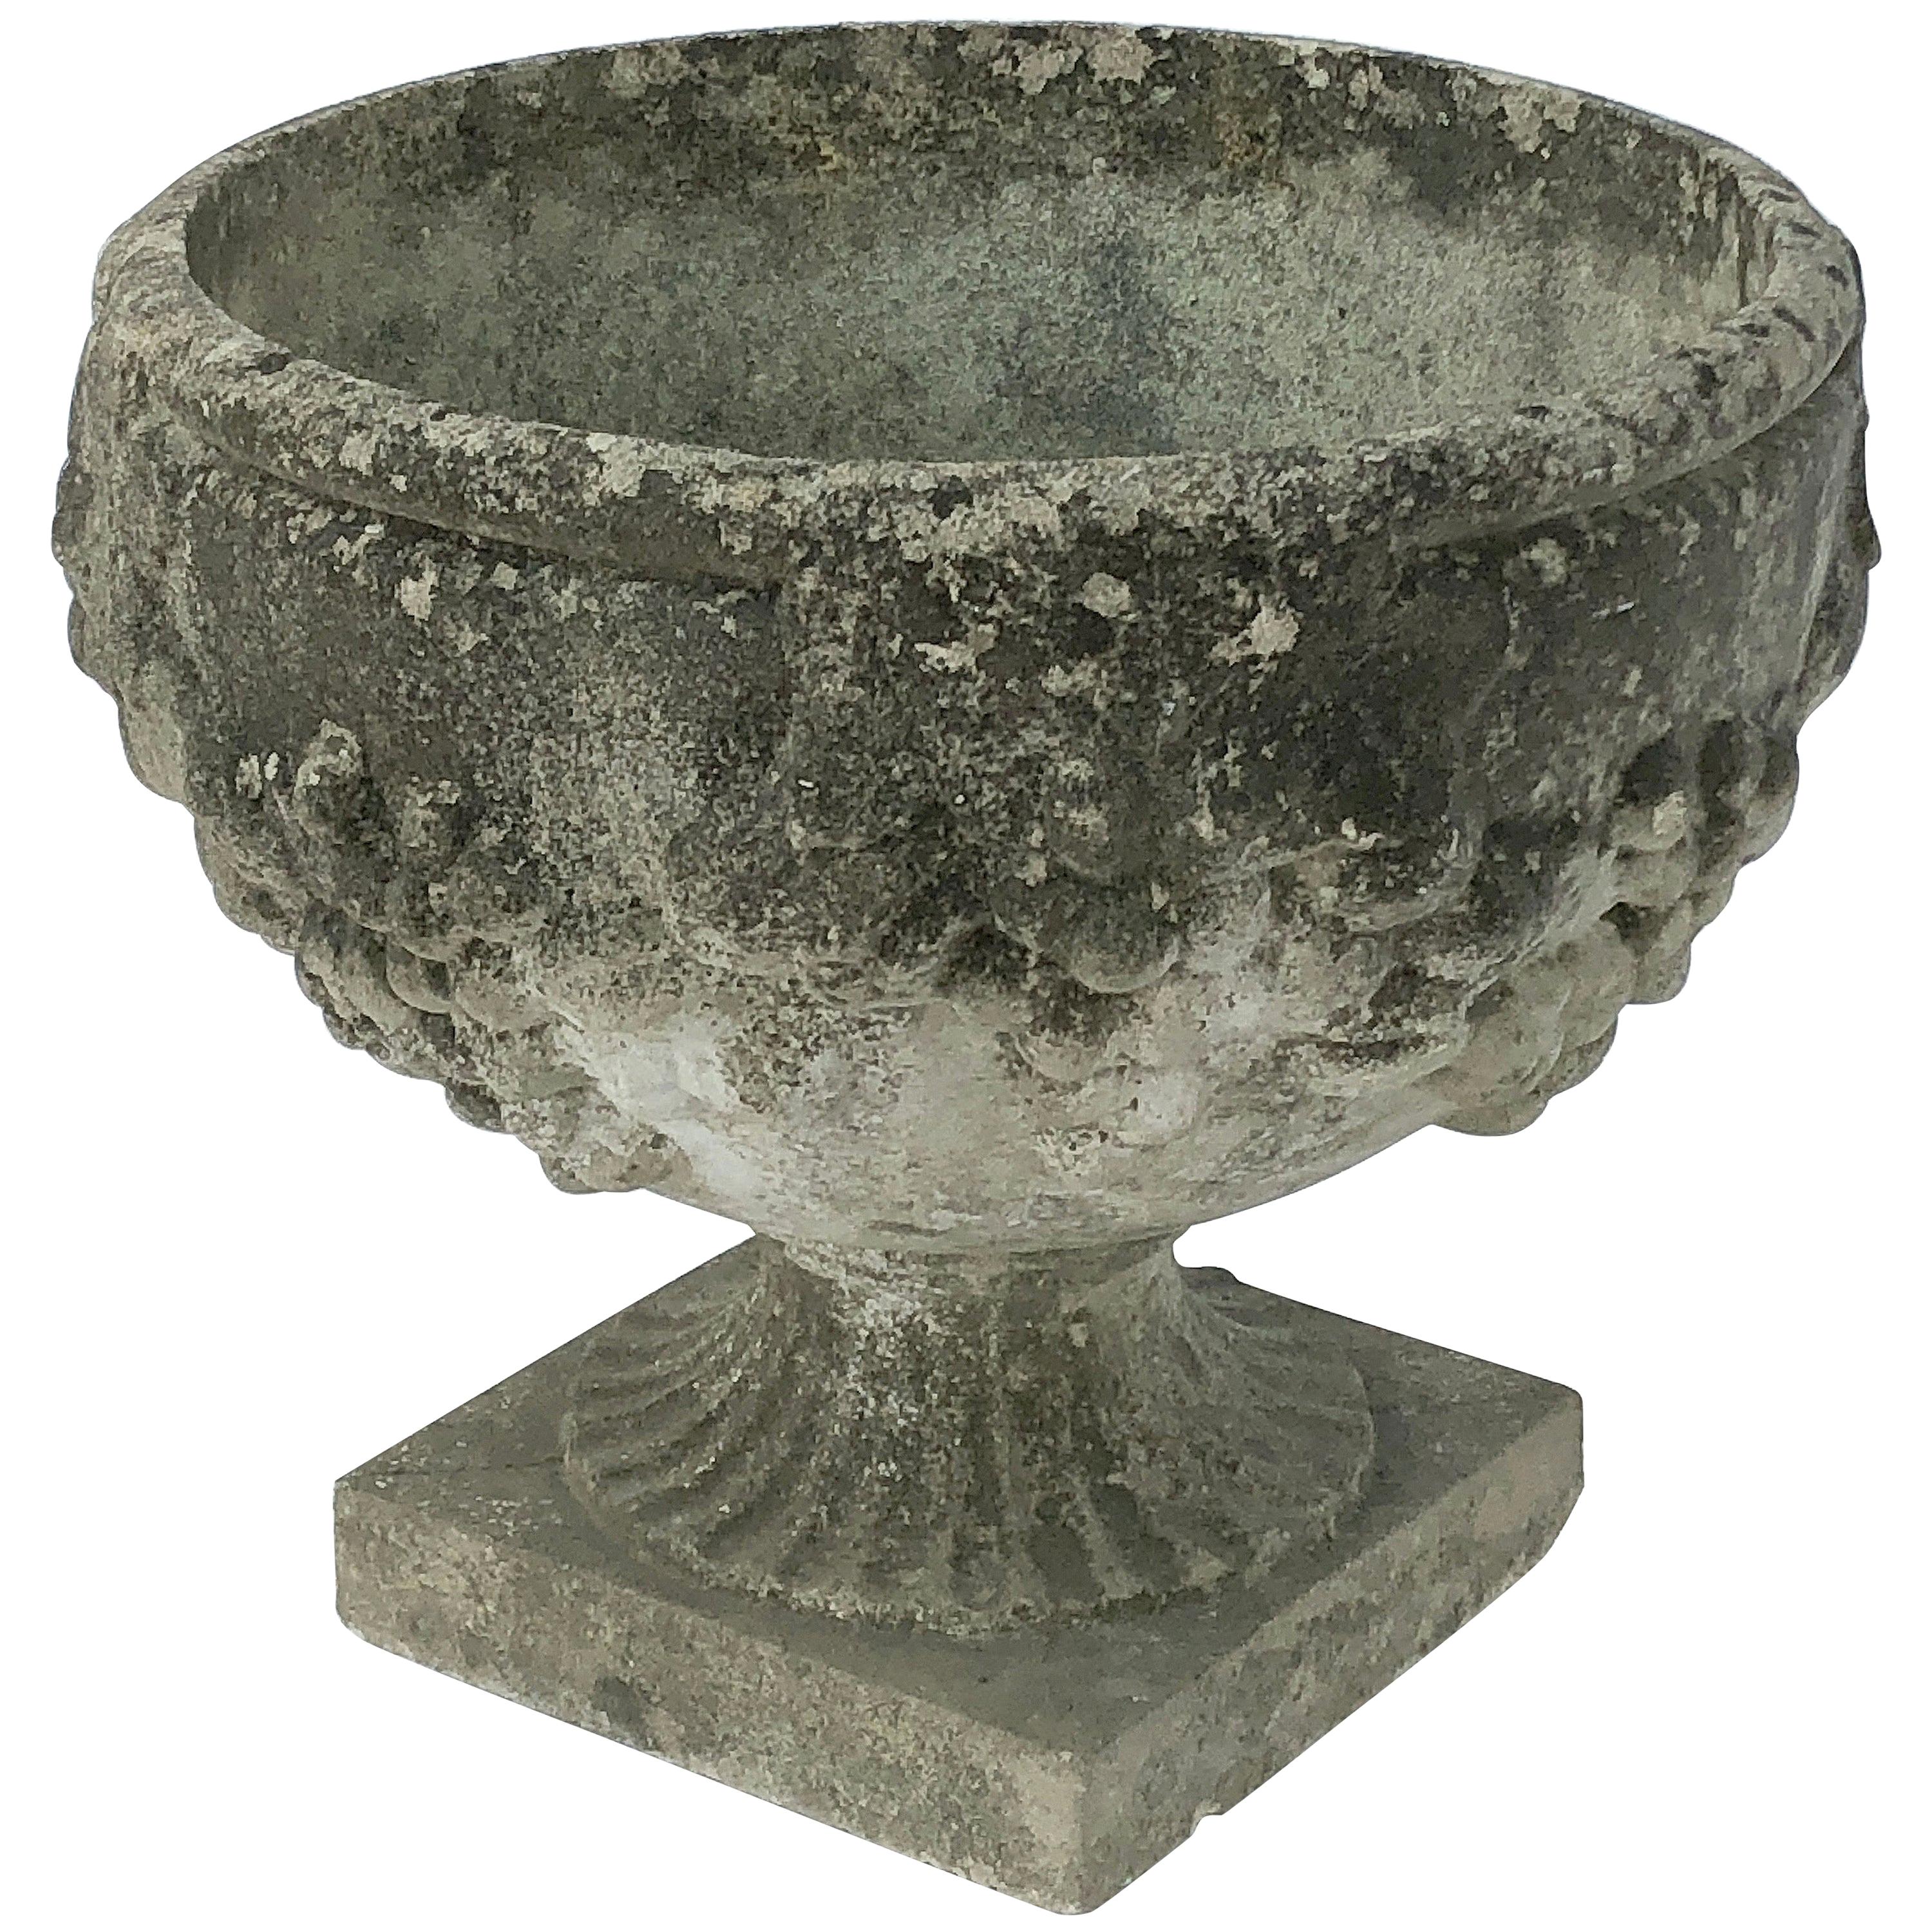 English Garden Stone Planter Pot or Urn with Relief of Grapes For Sale